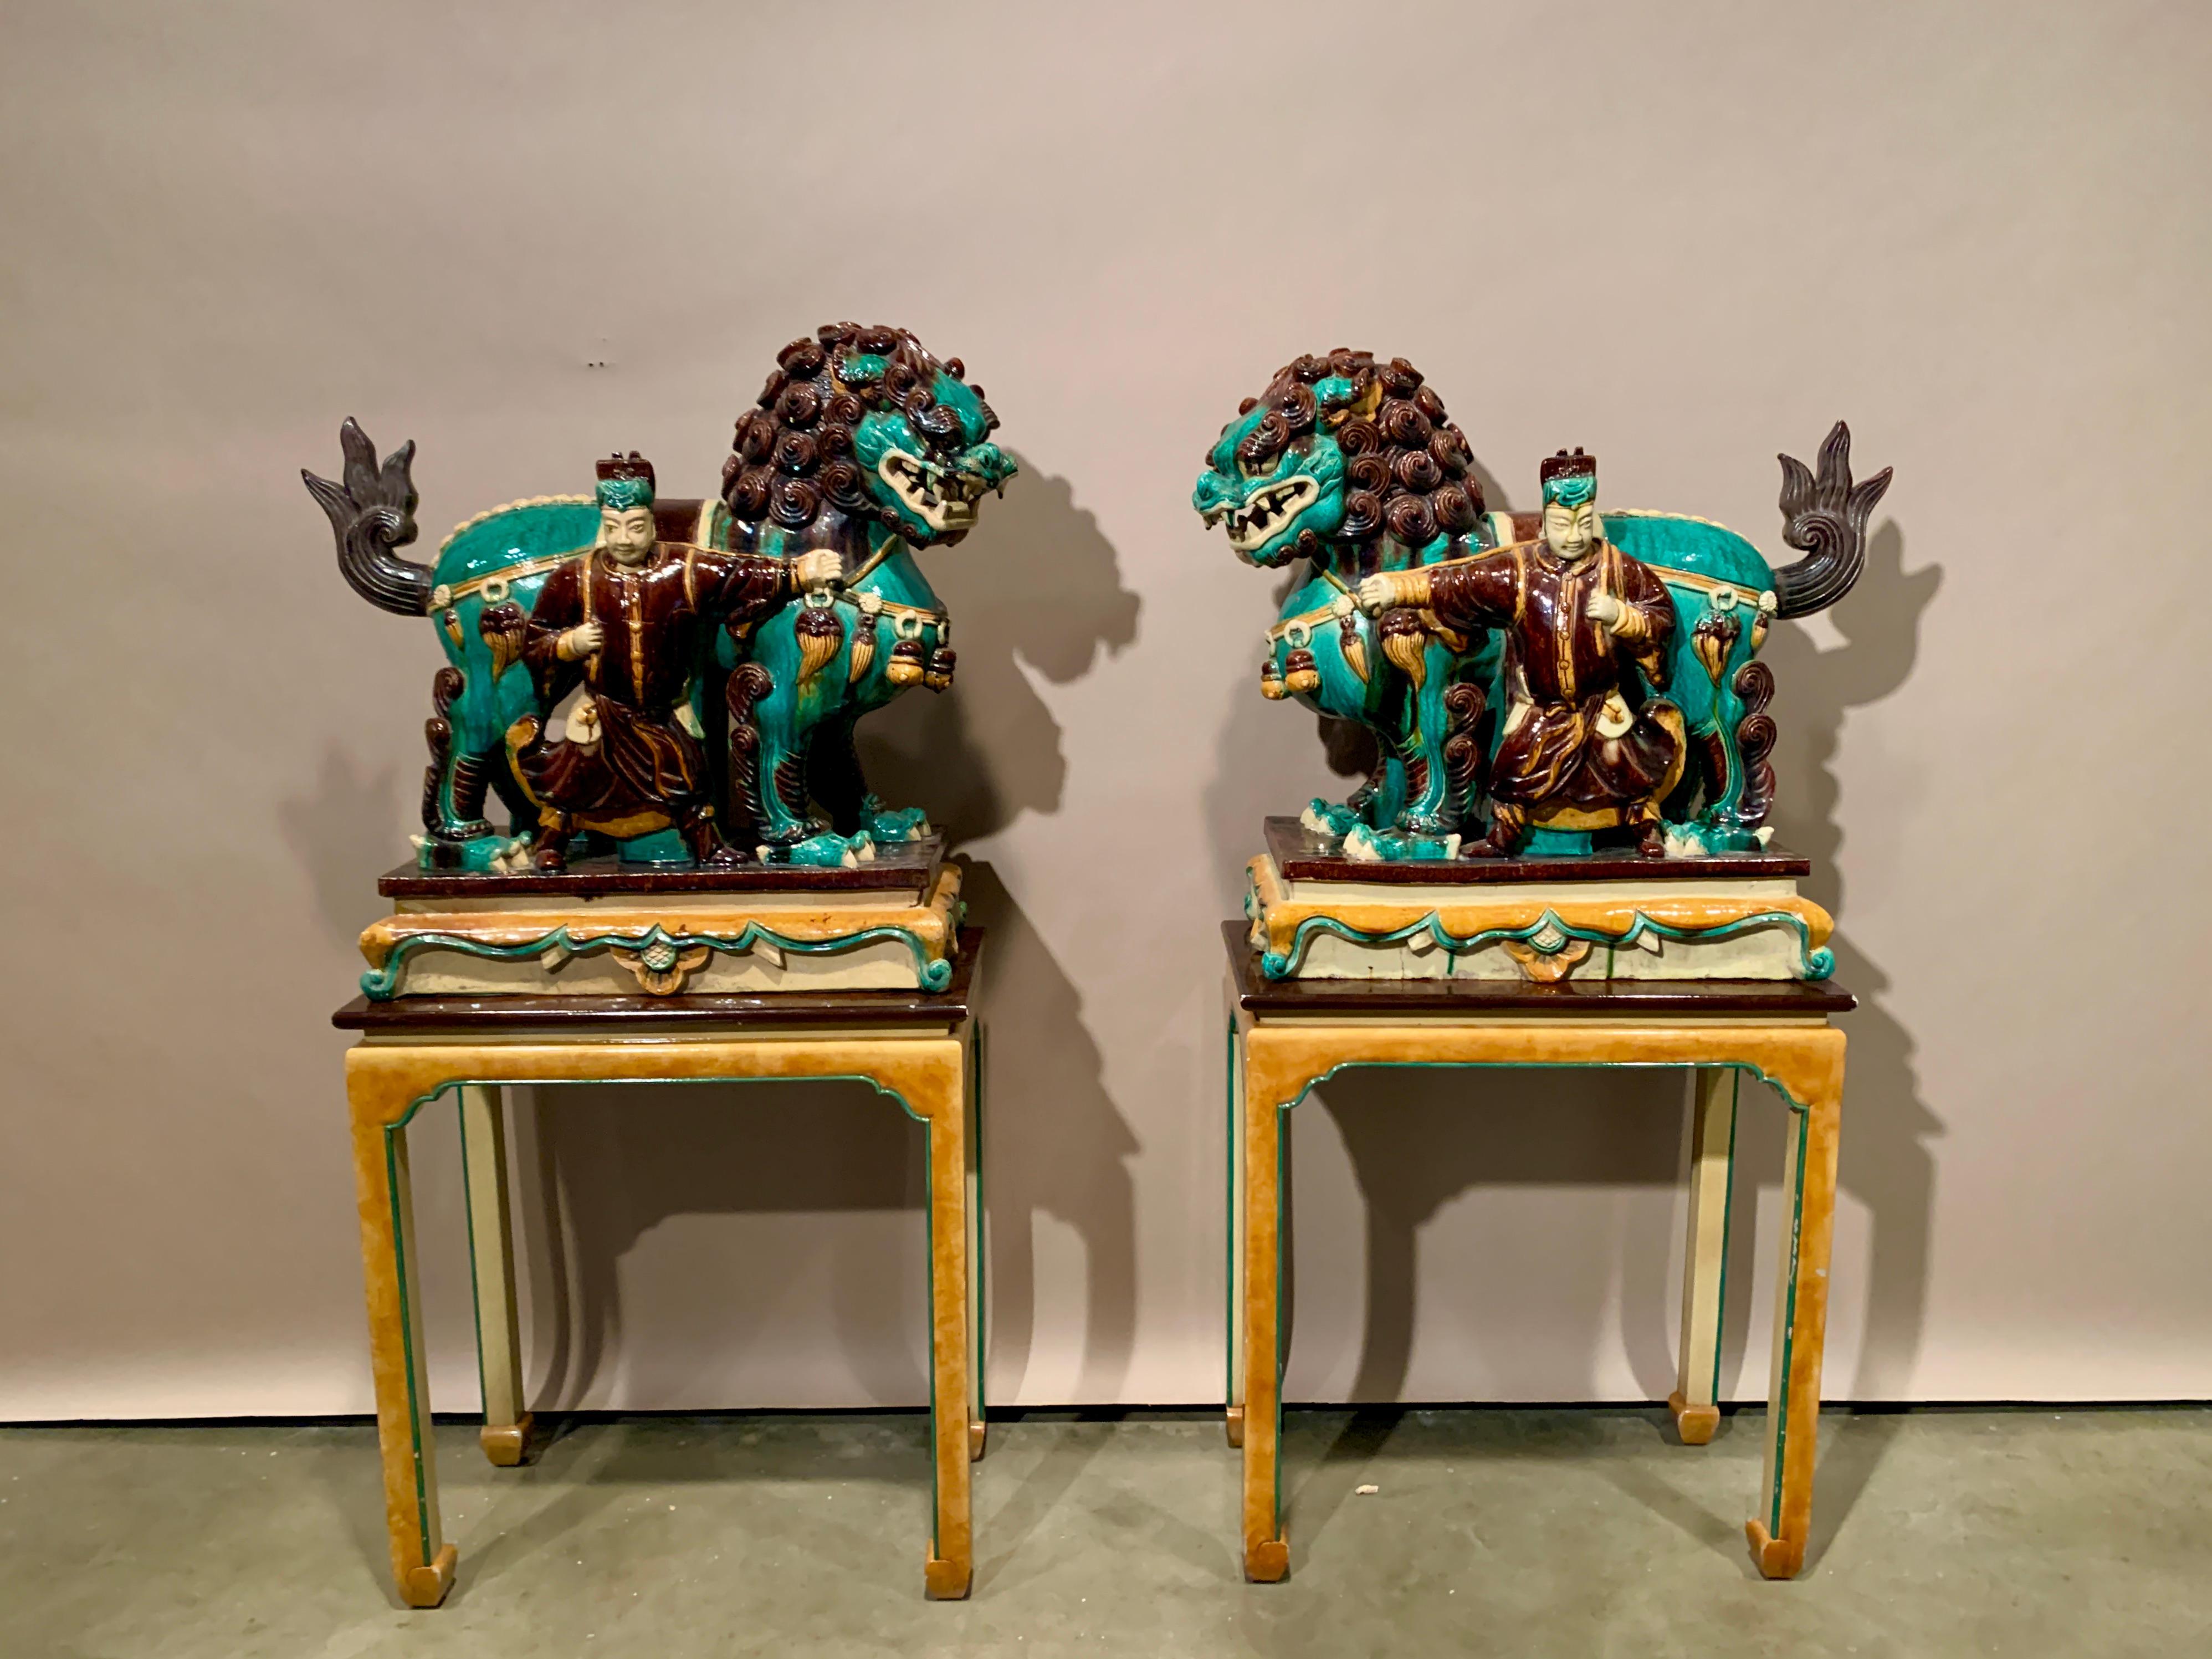 A fantastic pair of large Chinese tileworks sancai glazed Buddhistic lions and attendants, late Ming Dynasty, first half of the 17th century, Shanxi, China. Presented on custom 20th century wood and lacquer table-form stands. 

This pair of lions